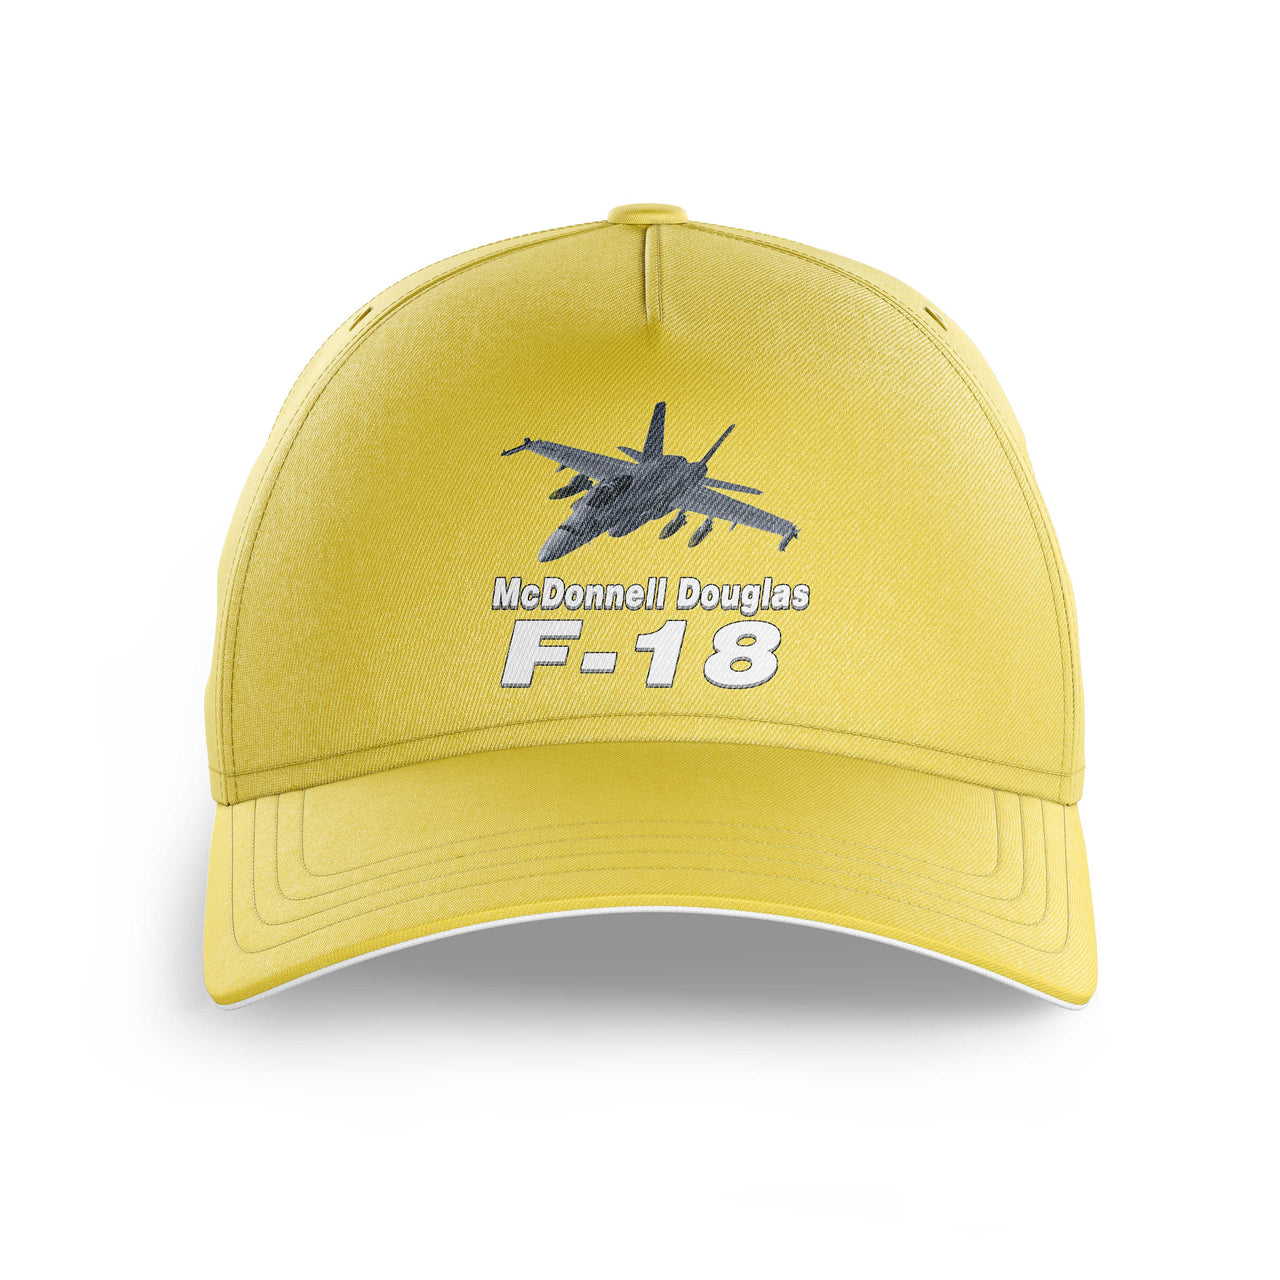 The McDonnell Douglas F18 Printed Hats